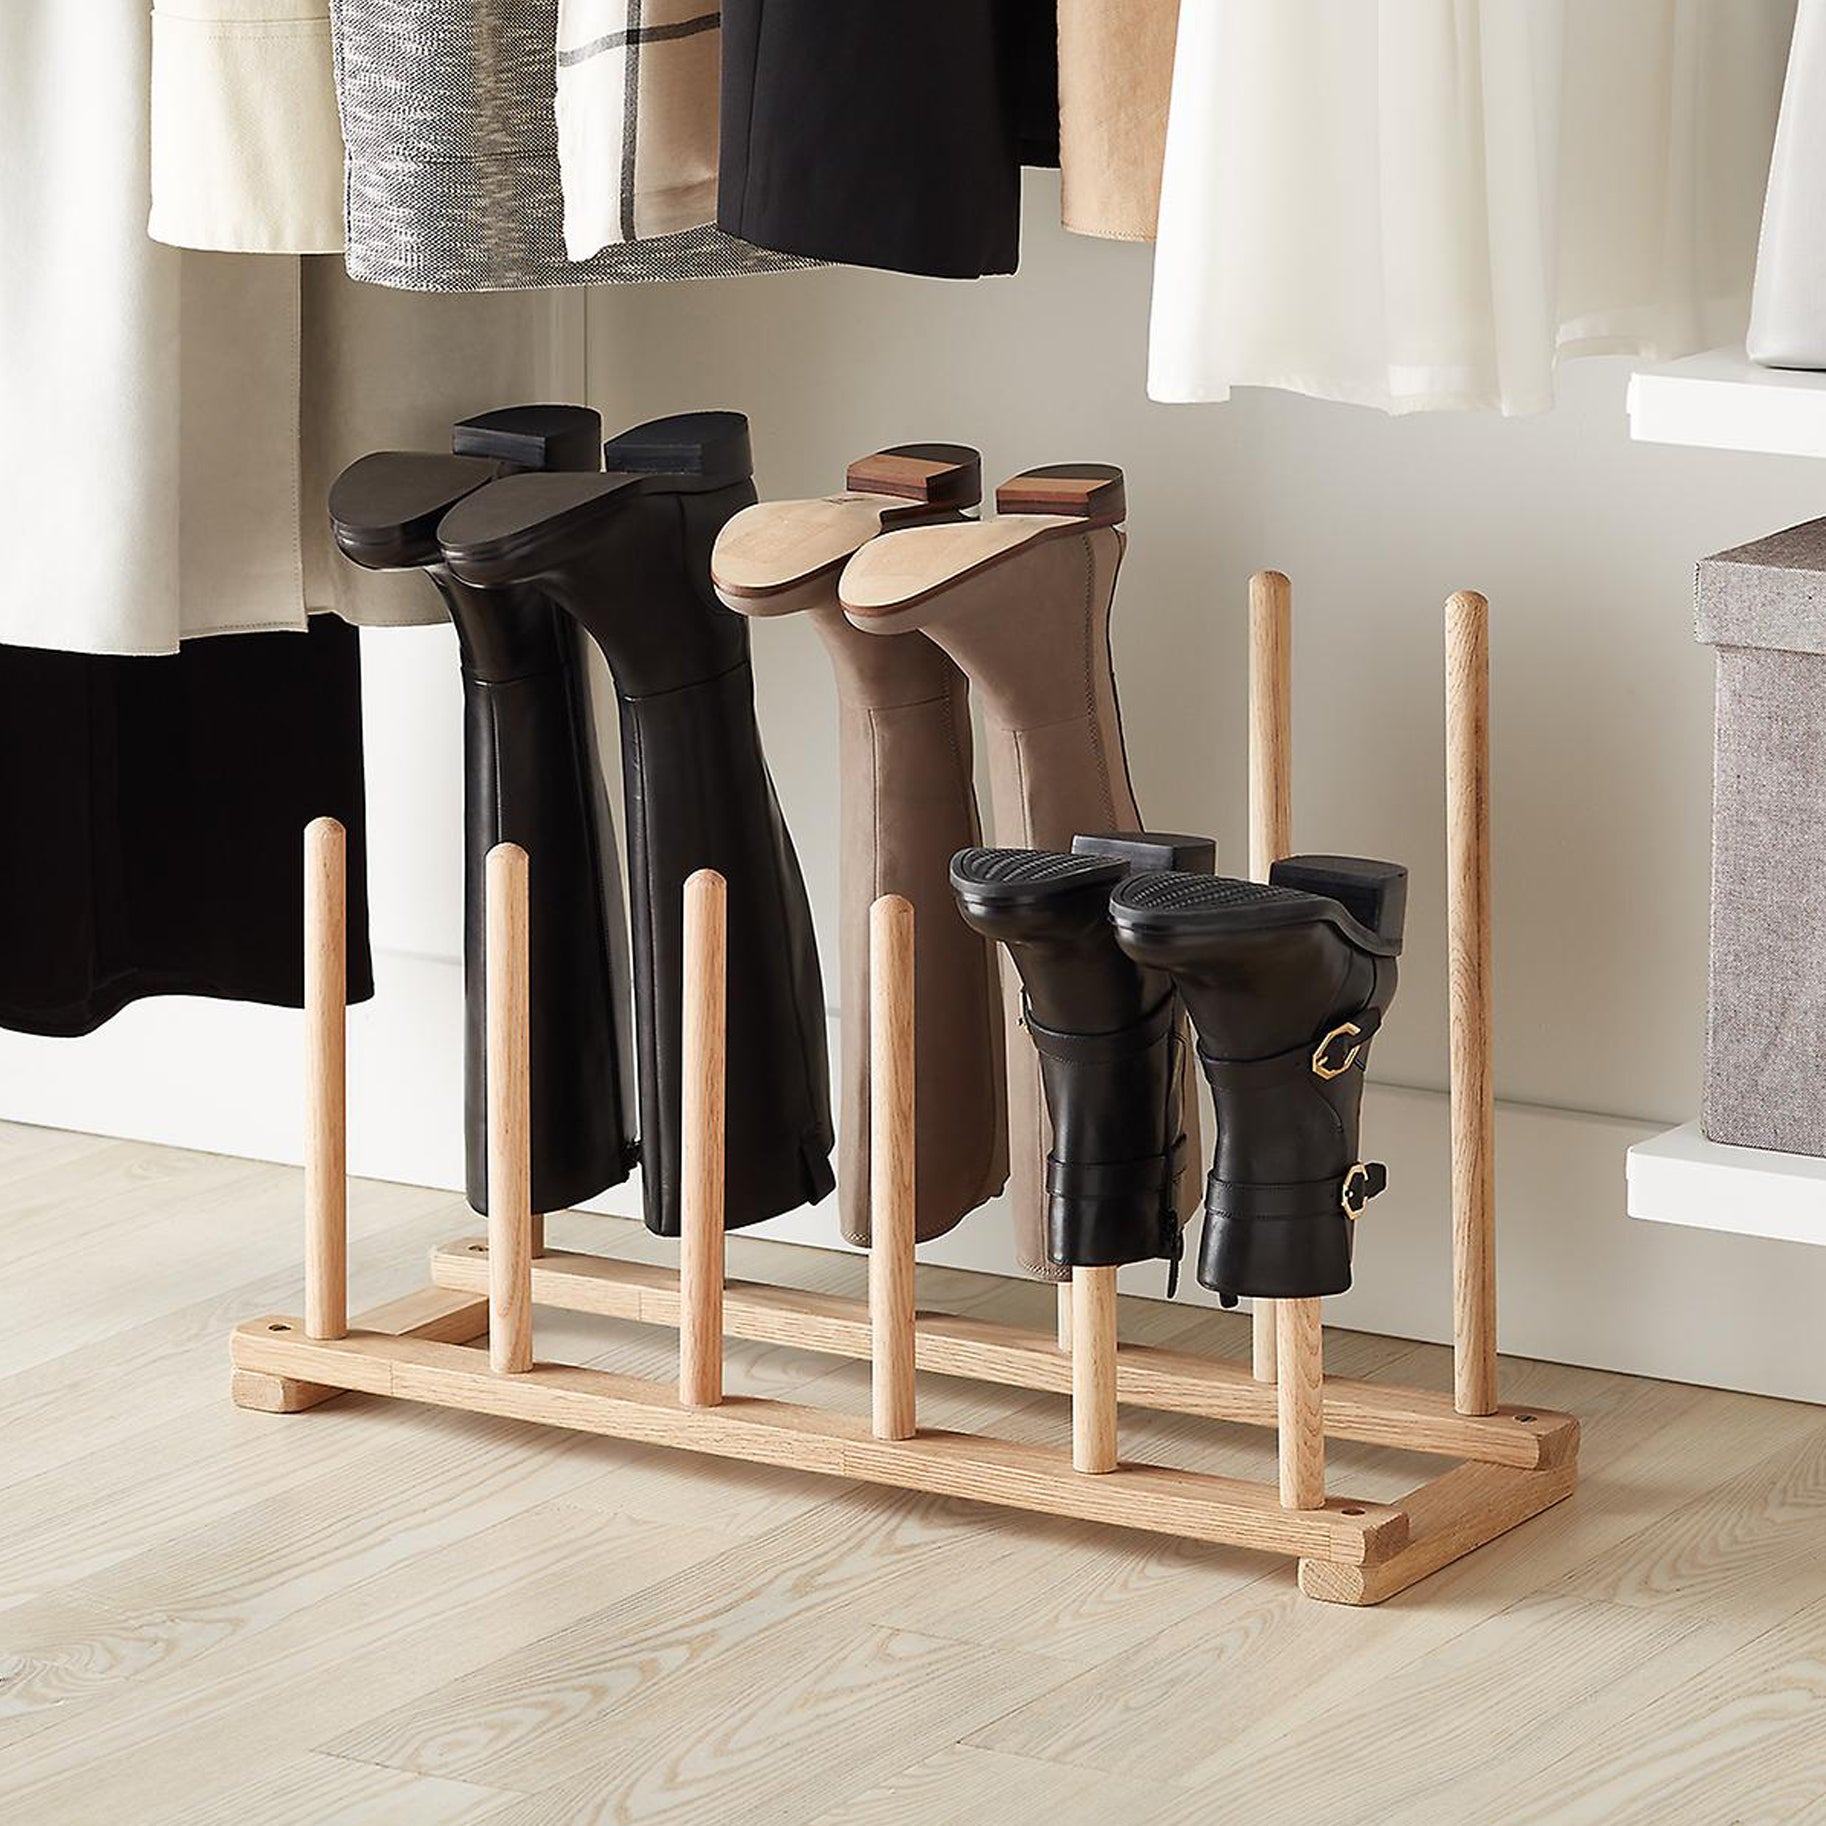 The Container Store 6 Pair Natural Boot Rack Domino